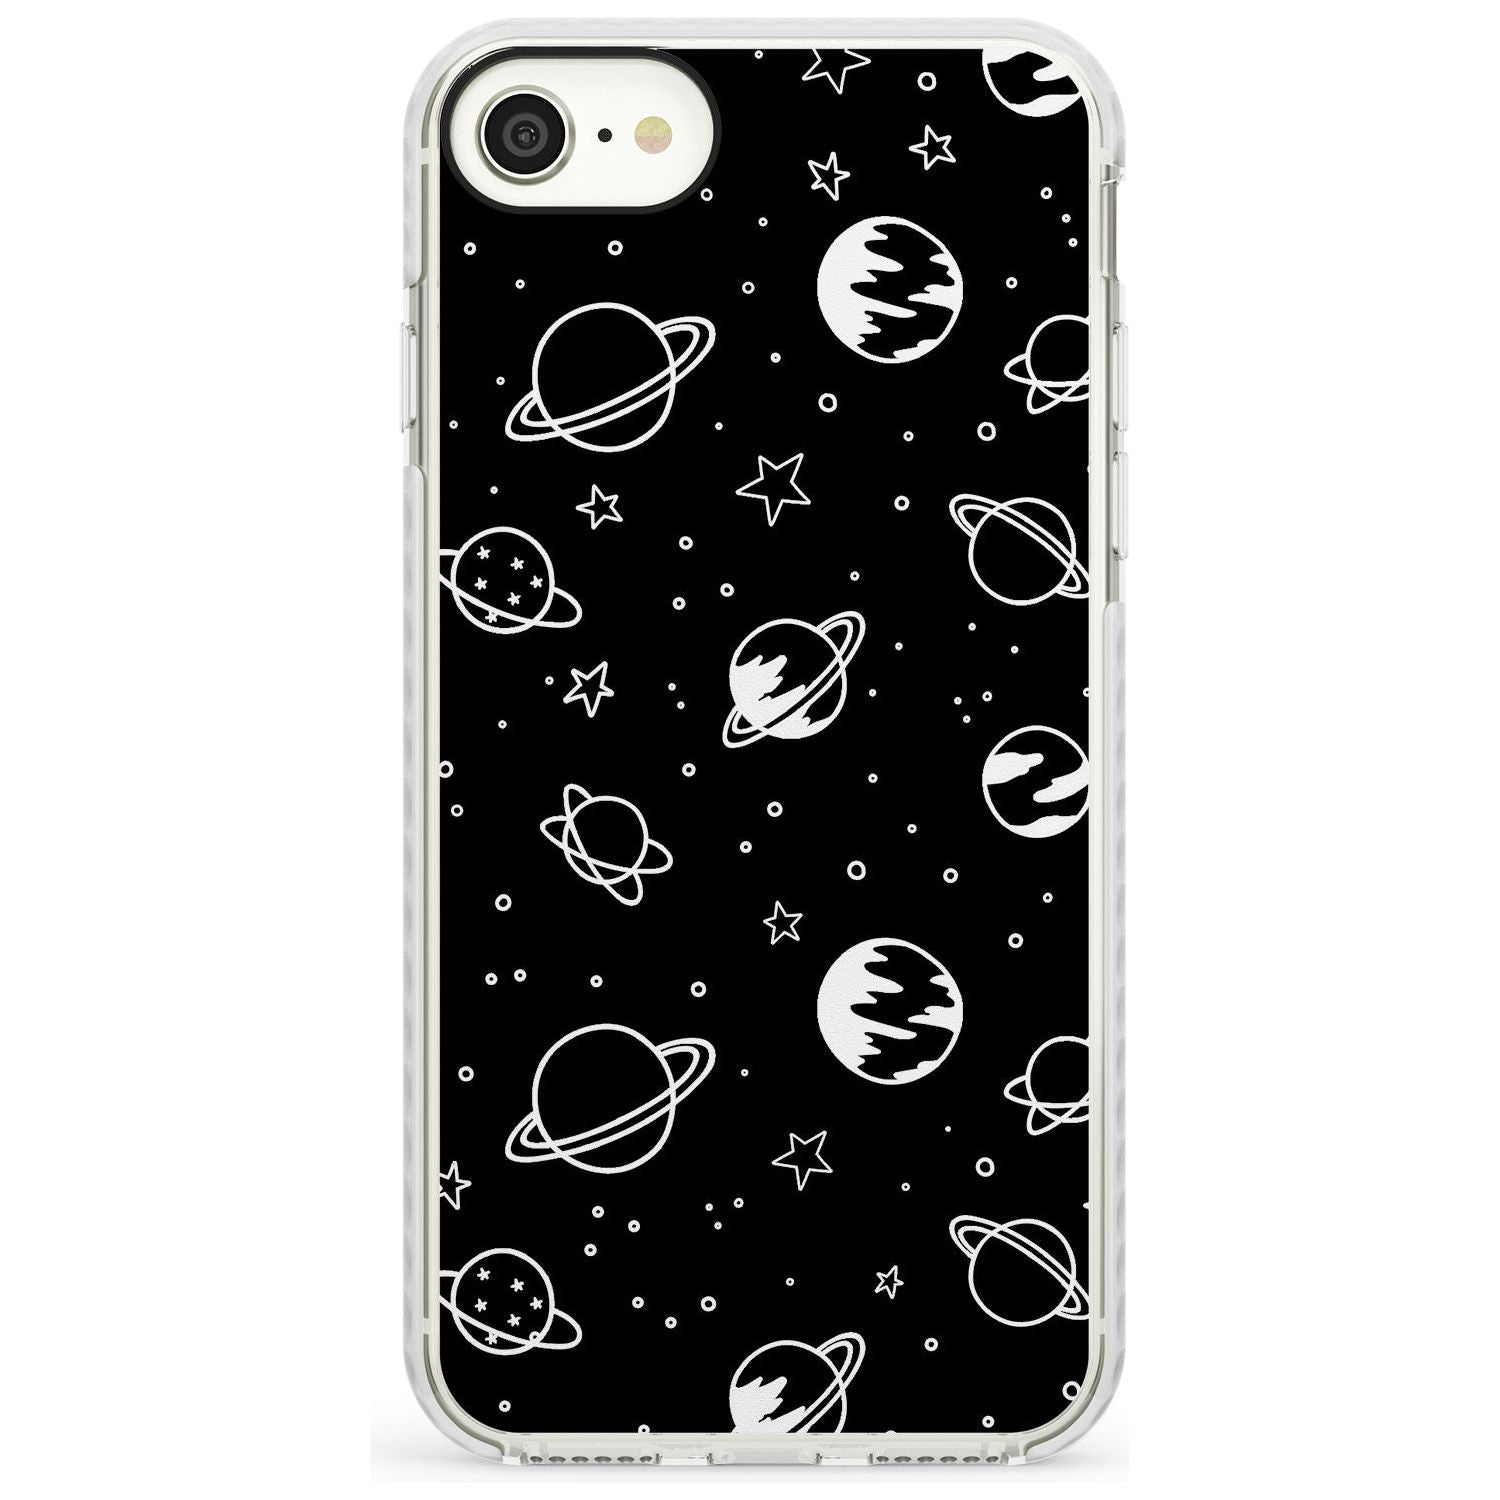 Outer Space Outlines: White on Black Slim TPU Phone Case for iPhone SE 8 7 Plus